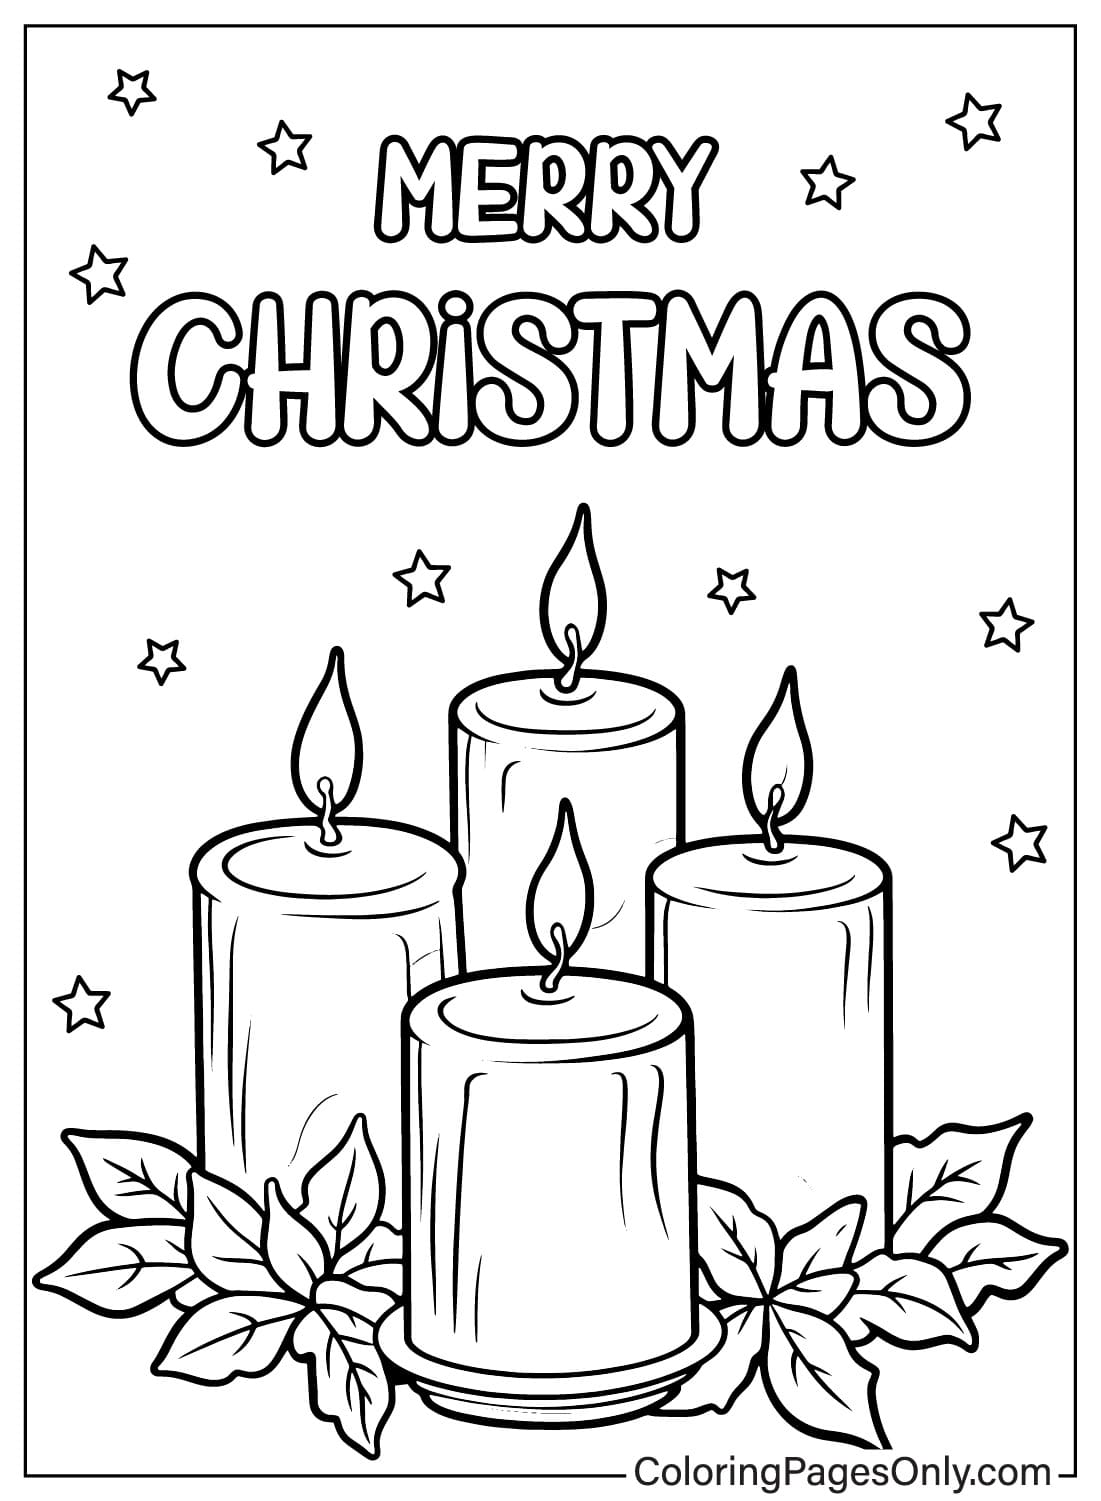 22 Christmas Candles Coloring Pages - ColoringPagesOnly.com